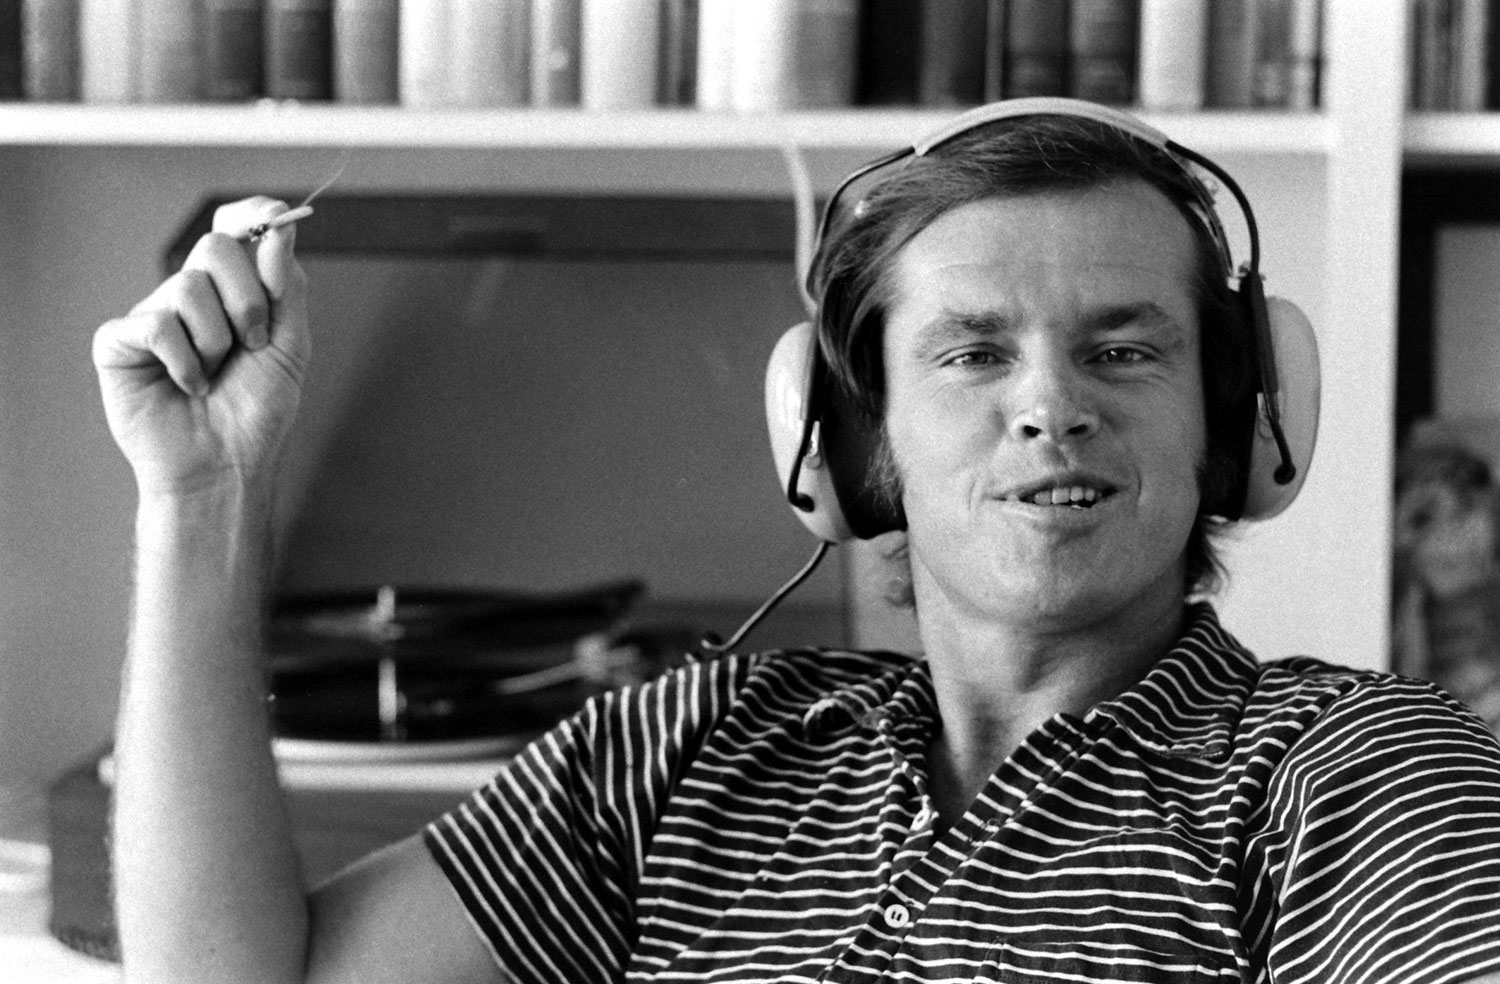 Jack Nicholson at home in Los Angeles, 1969.